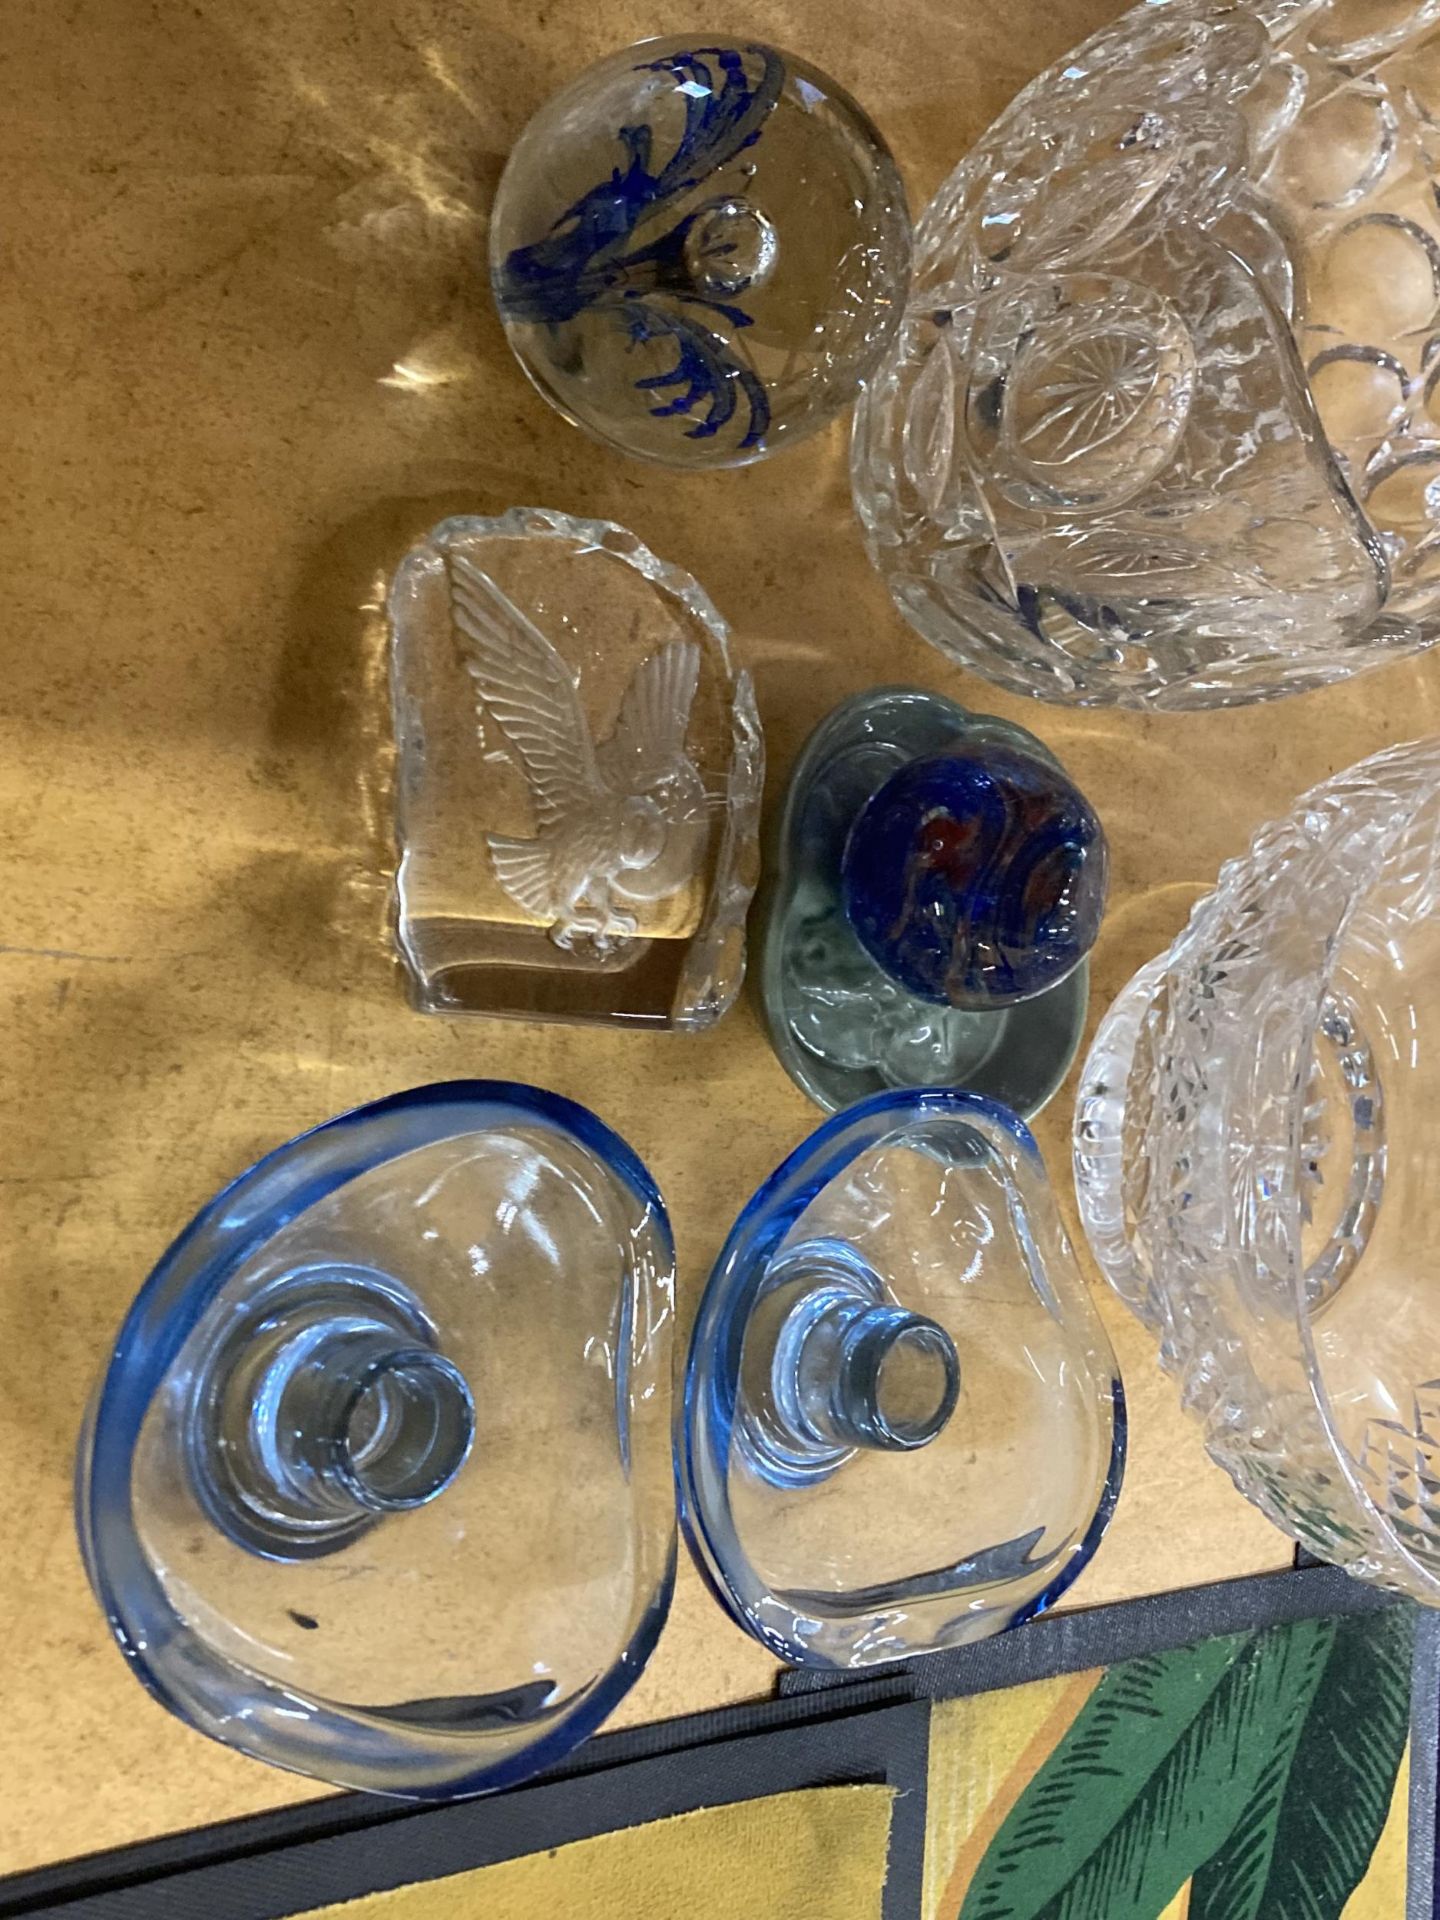 A MIXED LOT OF GLASSWARE TO INCLUDE CUT GLASS FRUIT BOWLS, BLUE ART GLASS CANDLE HOLDERS, SODA - Image 3 of 4